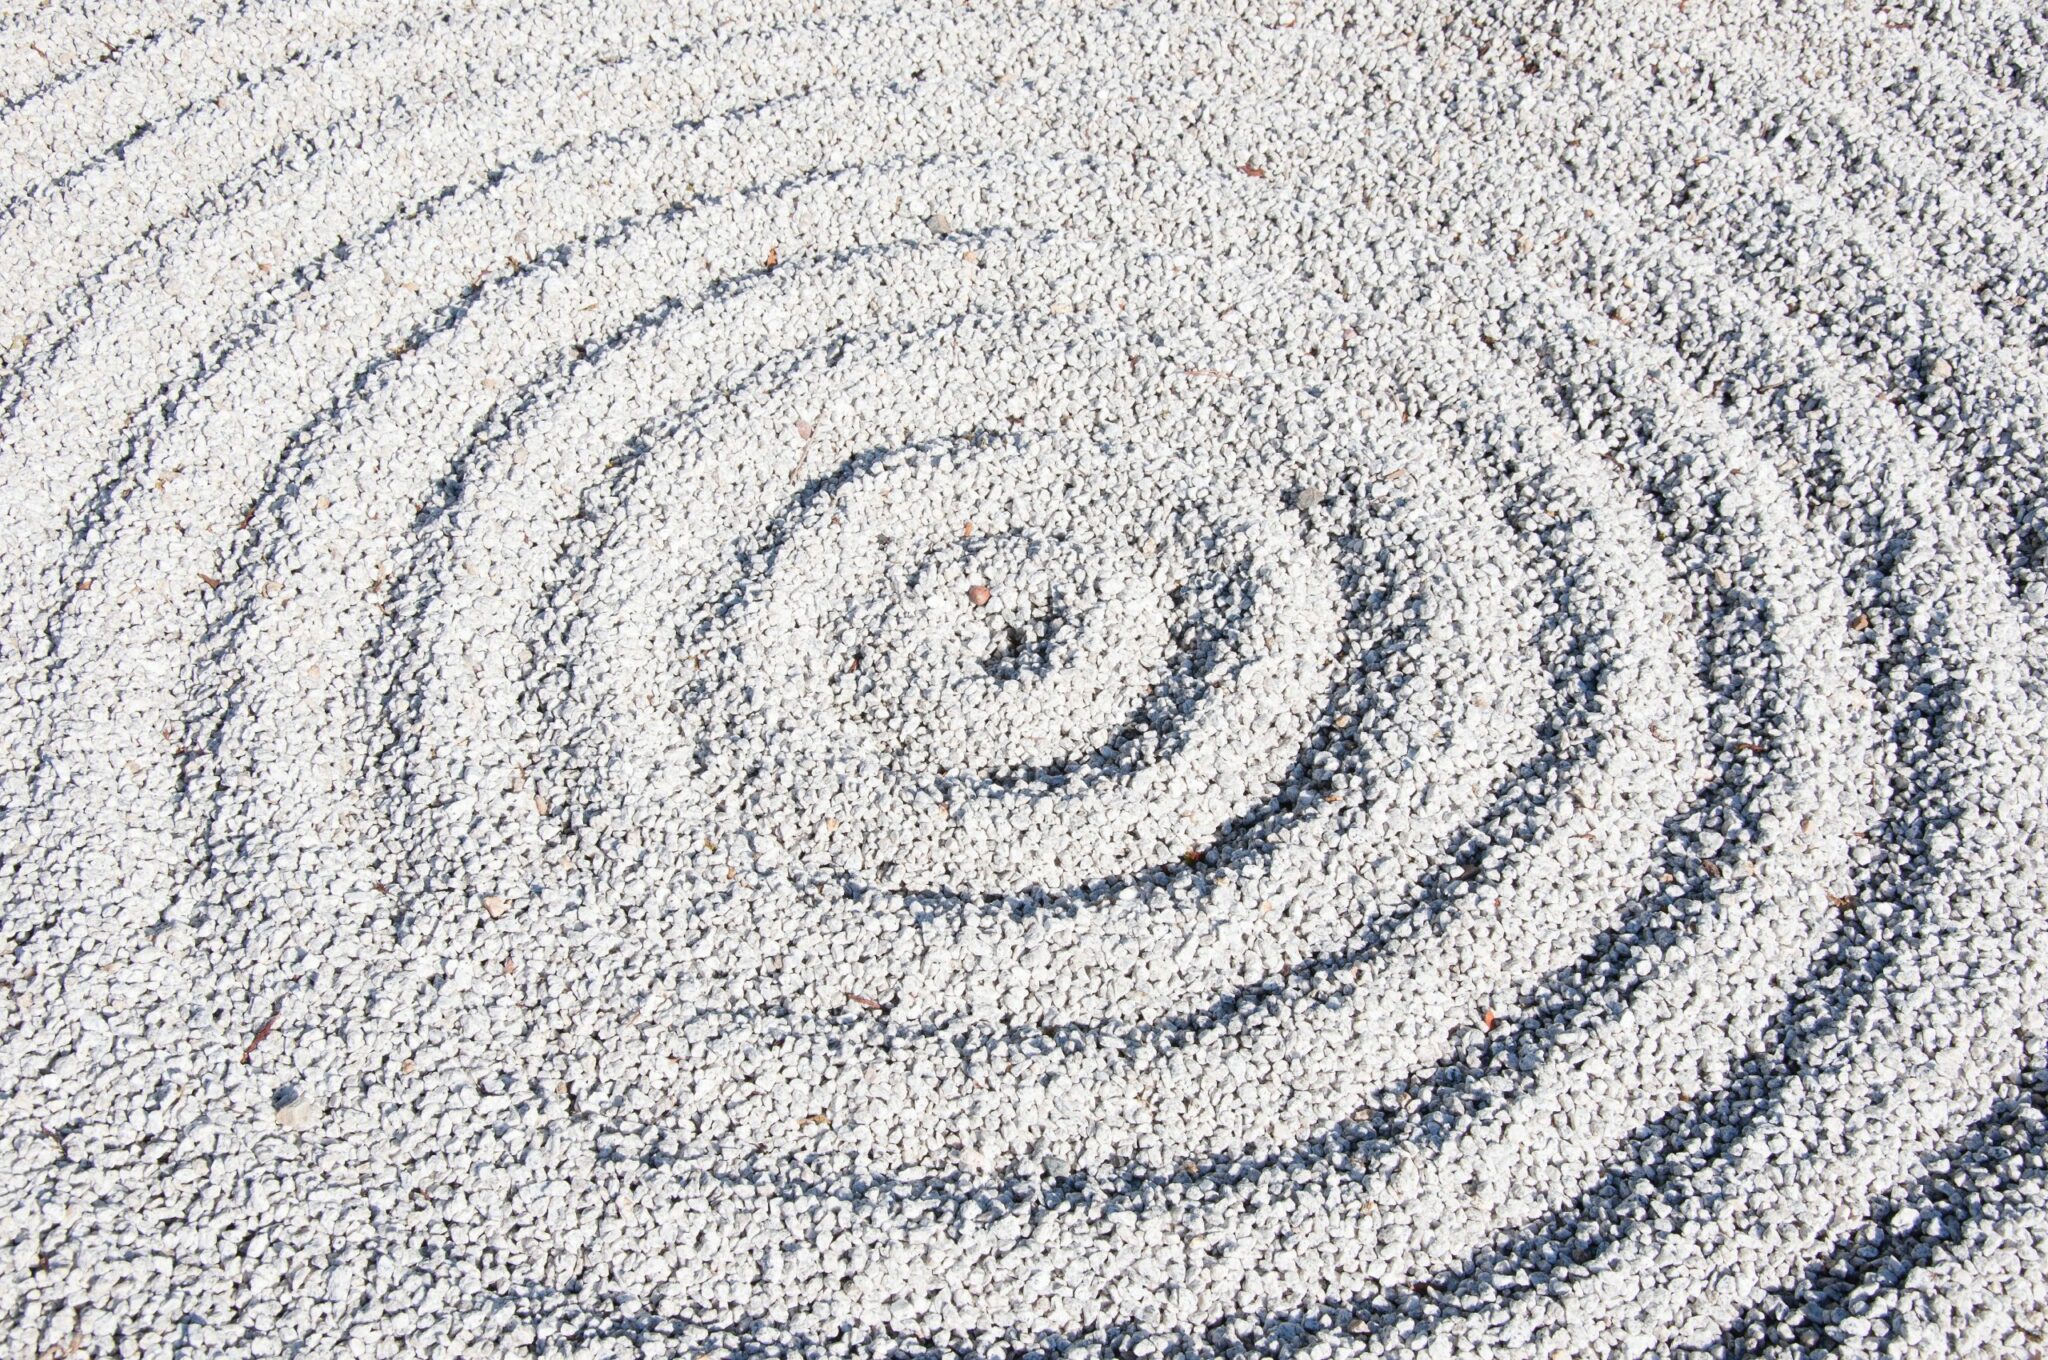 Concentric circles in sand.